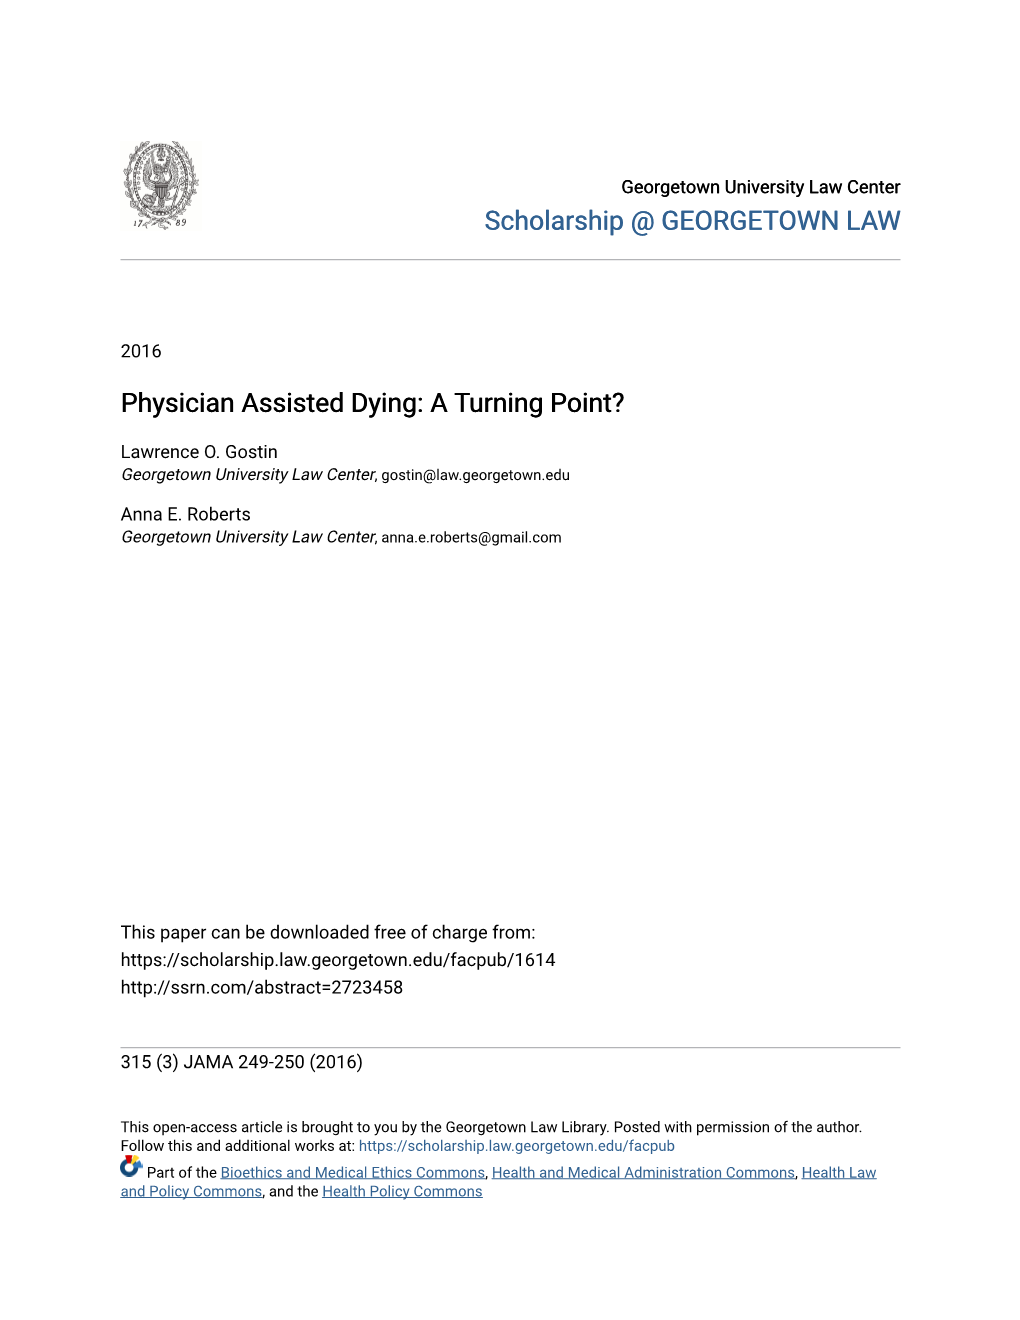 Physician Assisted Dying: a Turning Point?